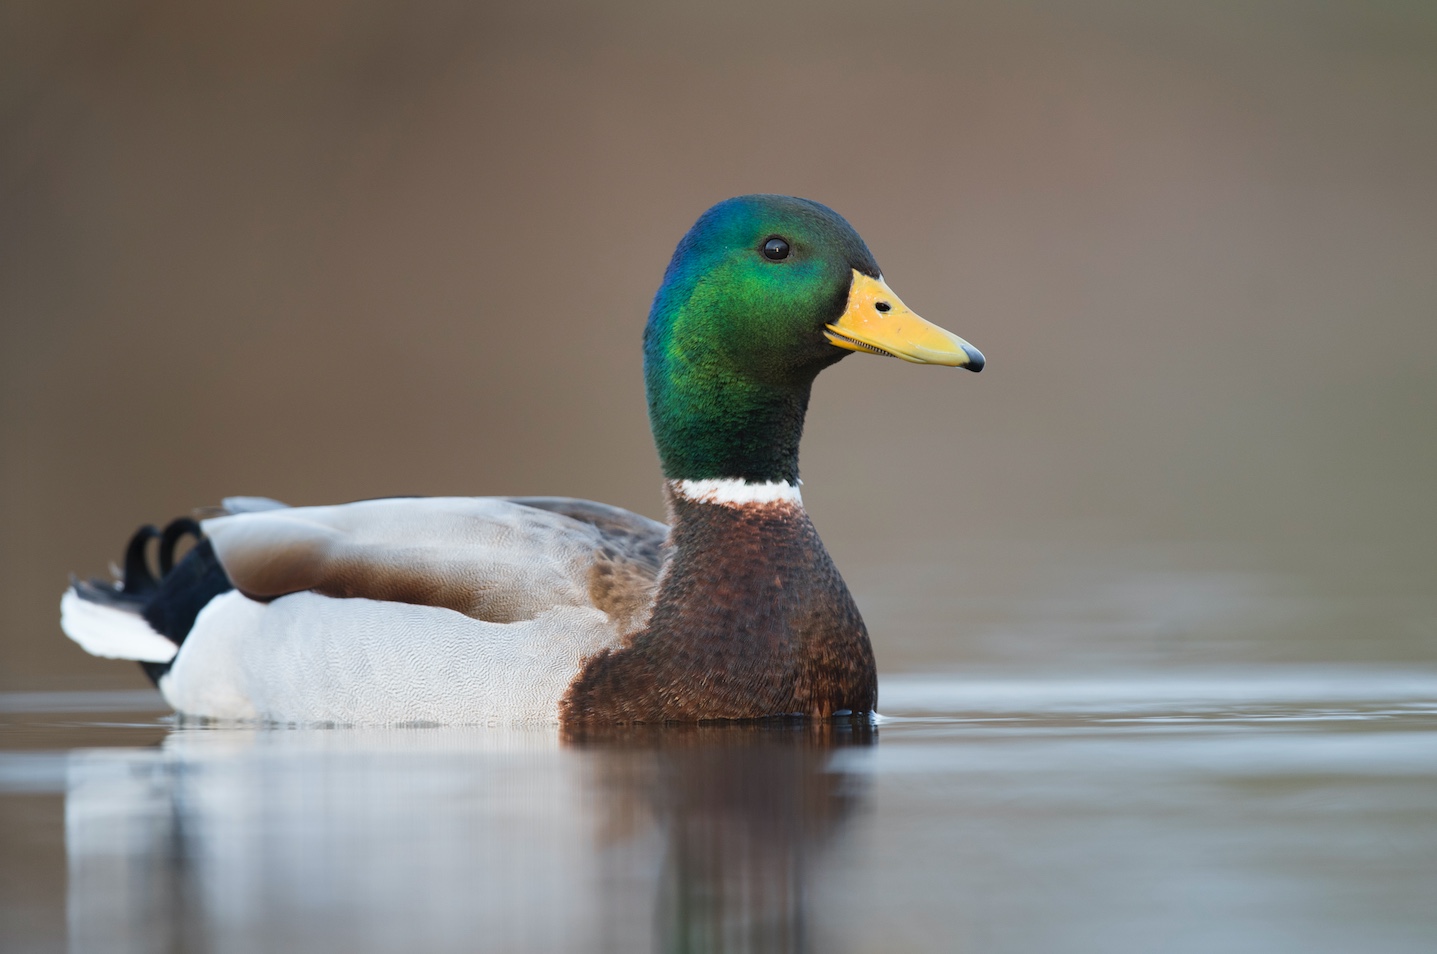 Image of a duck